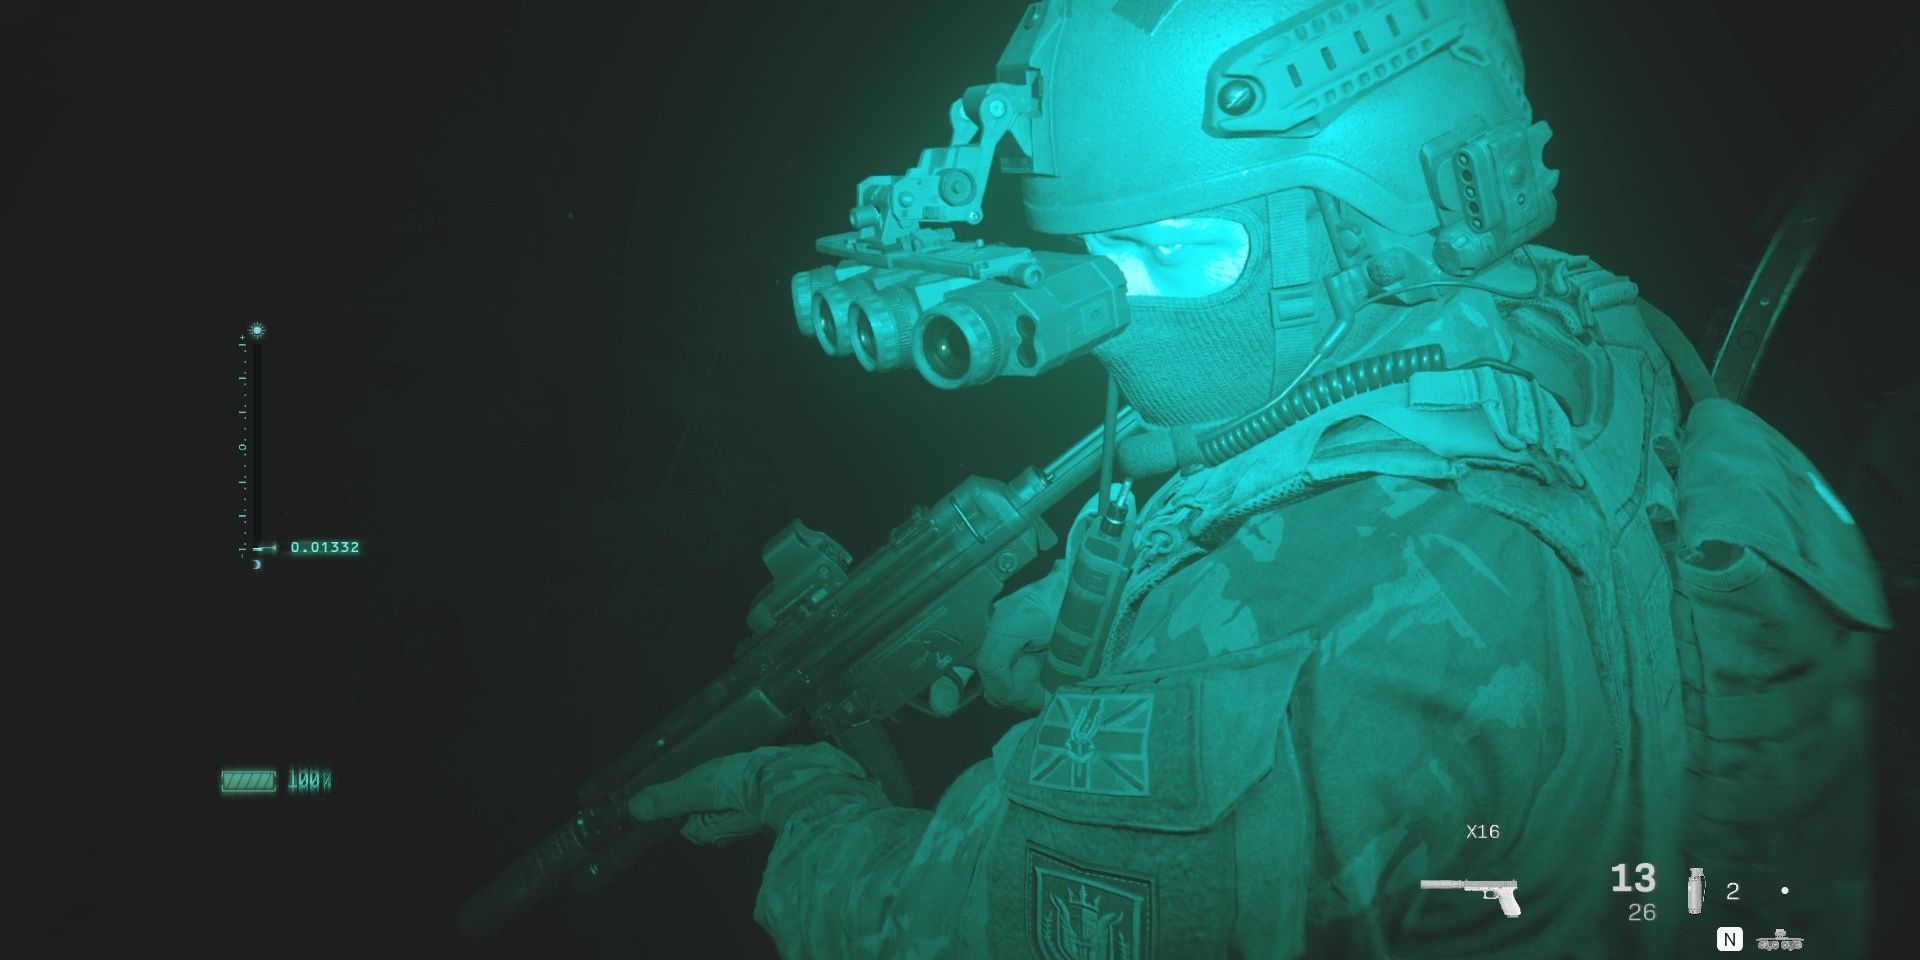 Call of Duty Modern Warfare Night Vision showing an operator with NV goggles